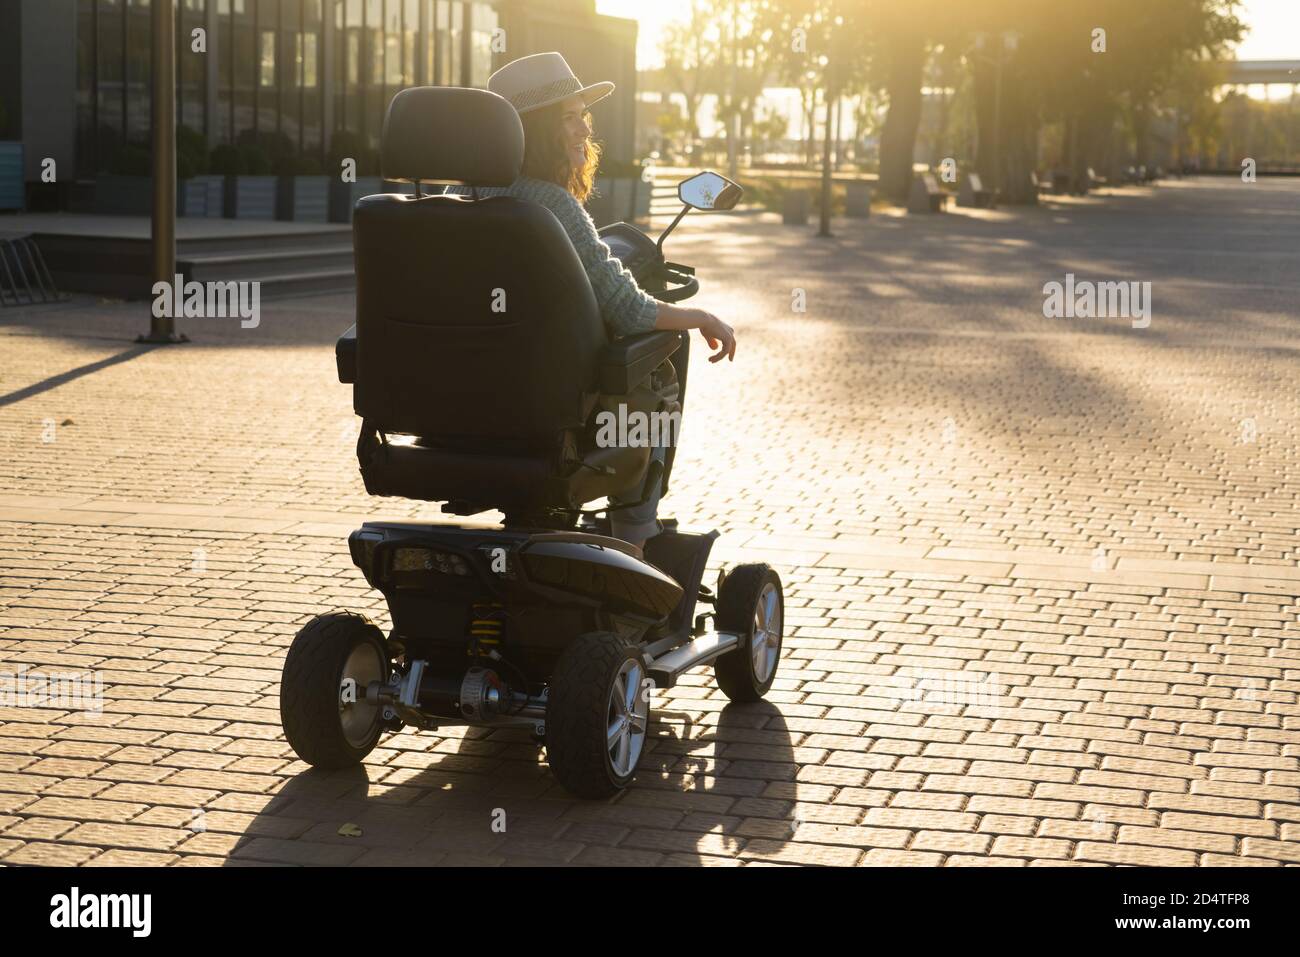 Woman tourist riding a four wheel mobility electric scooter on a city street. Stock Photo